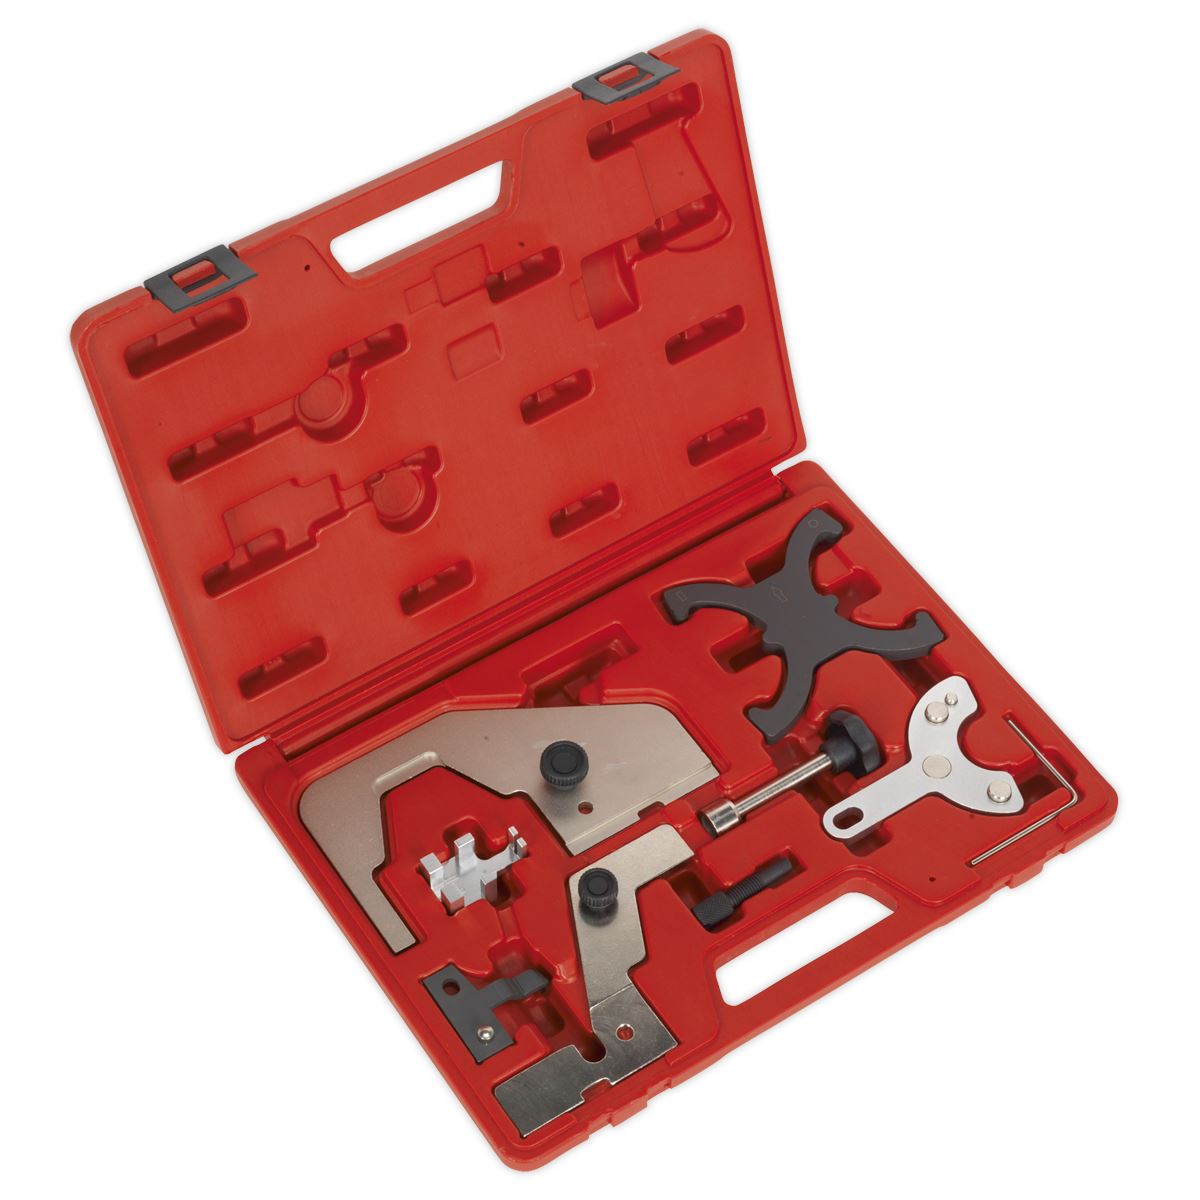 Sealey Petrol Engine Timing Tool Kit - for Ford, Volvo, Mazda 1.5, 1.6, 2.0 - Belt/Chain Drive